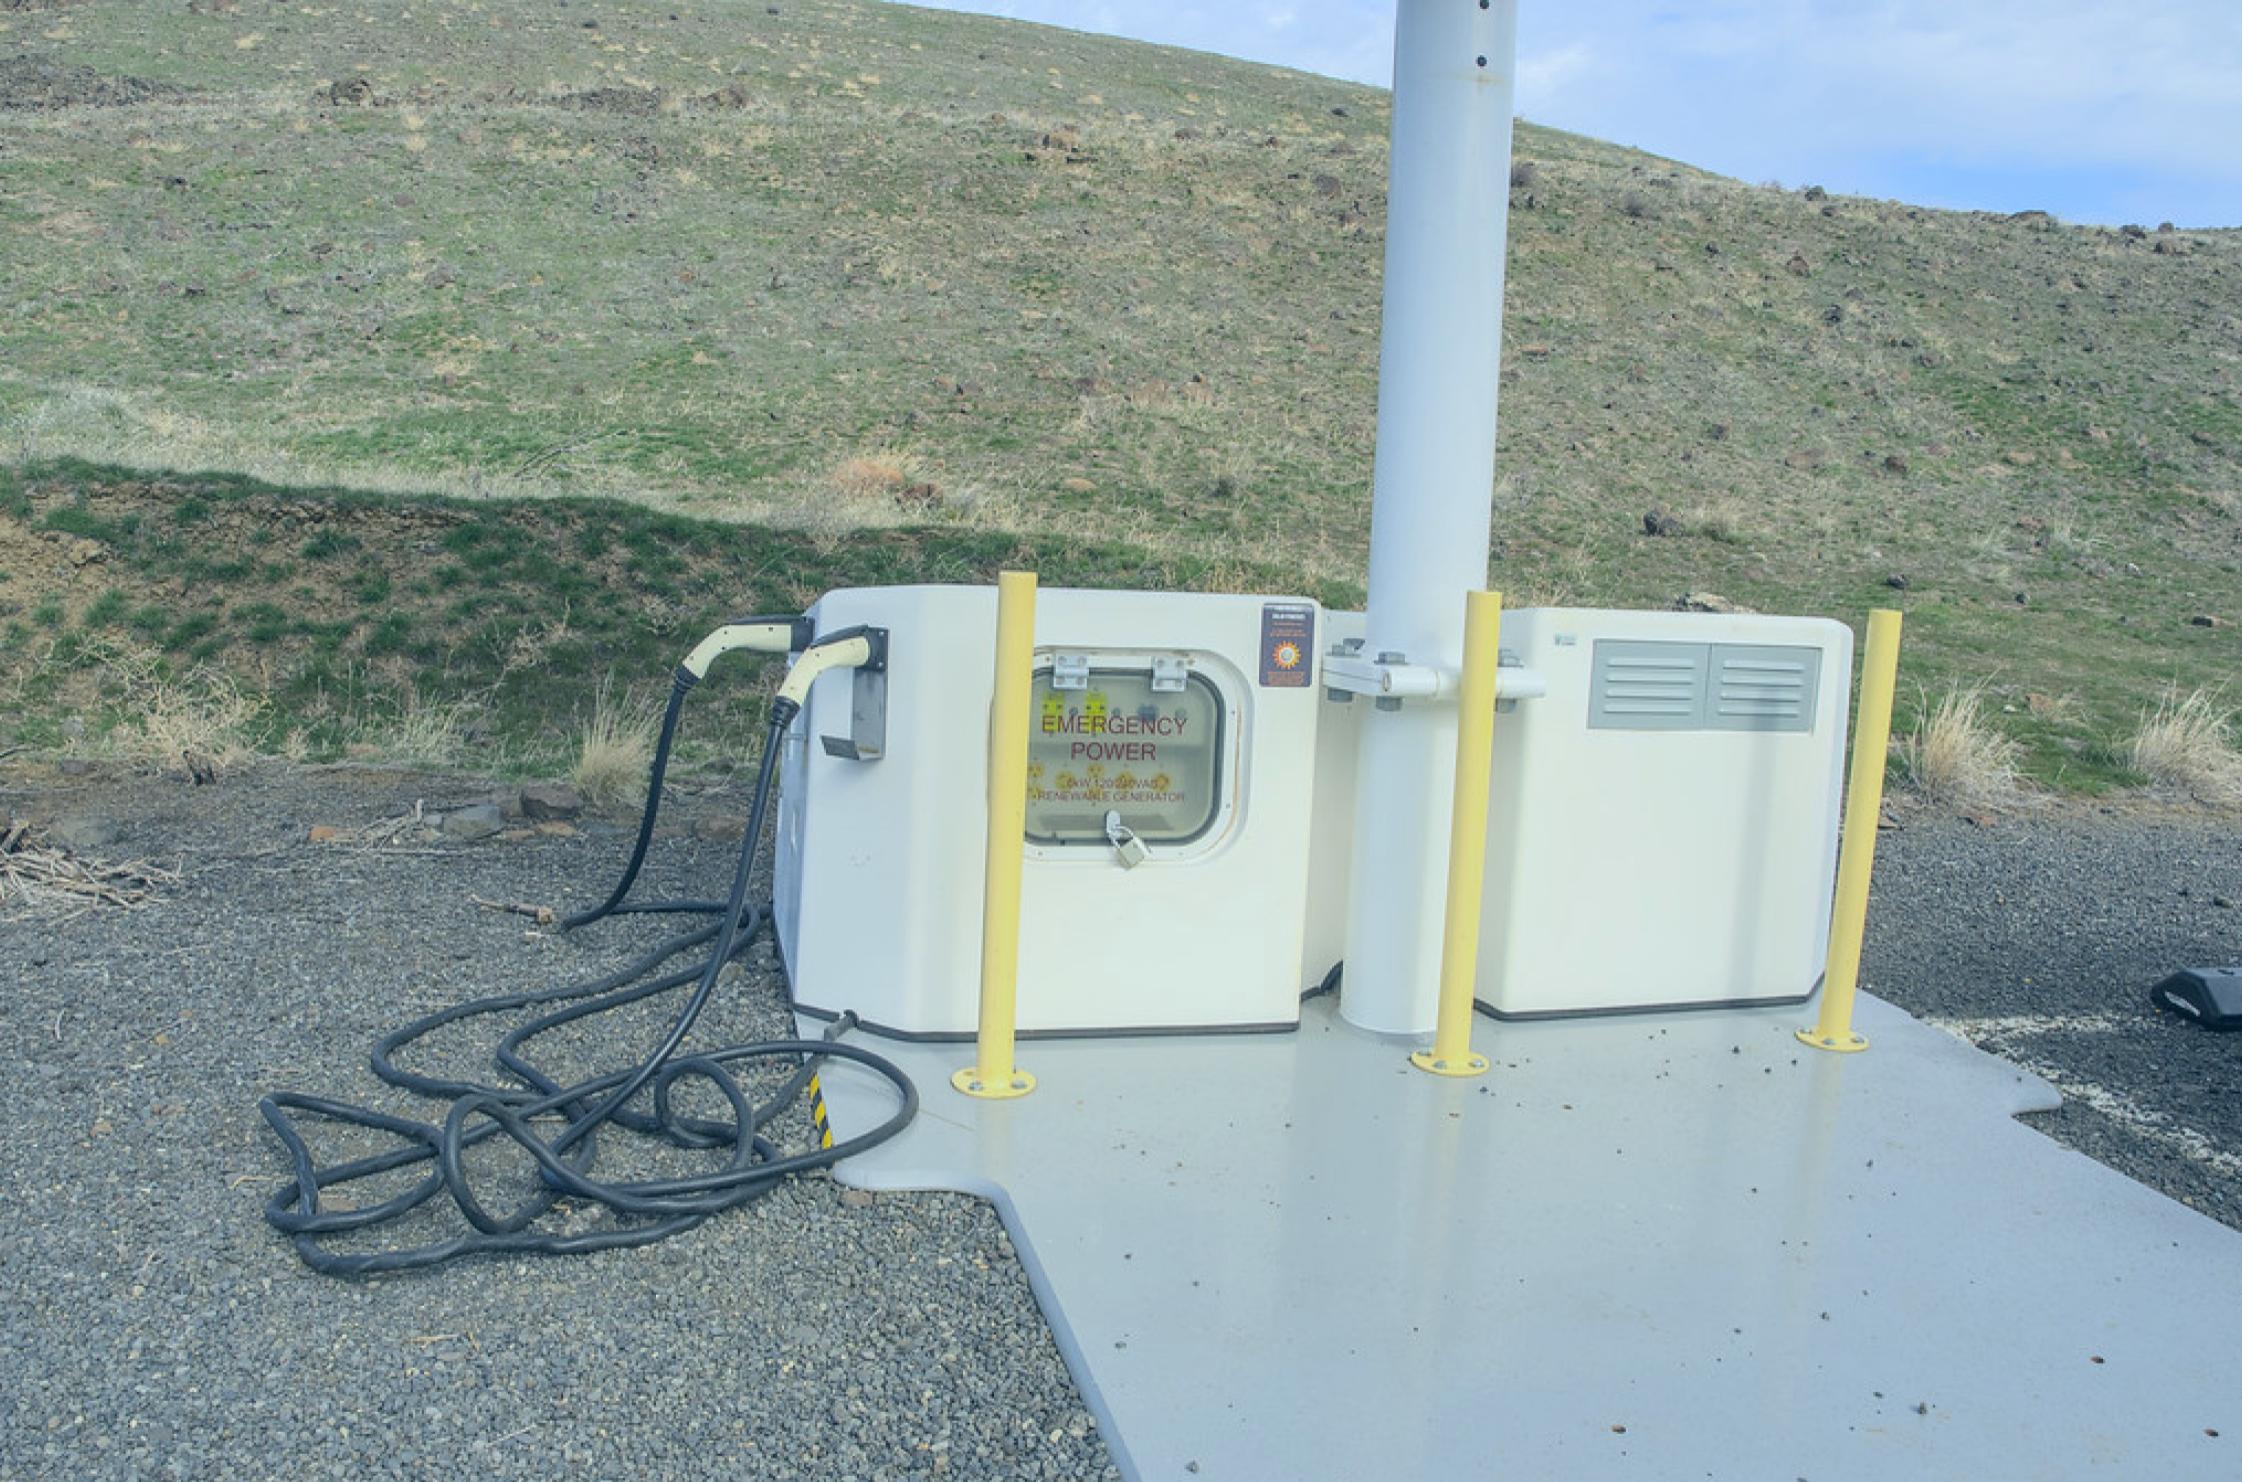 Electric vehicle charger in a rural setting